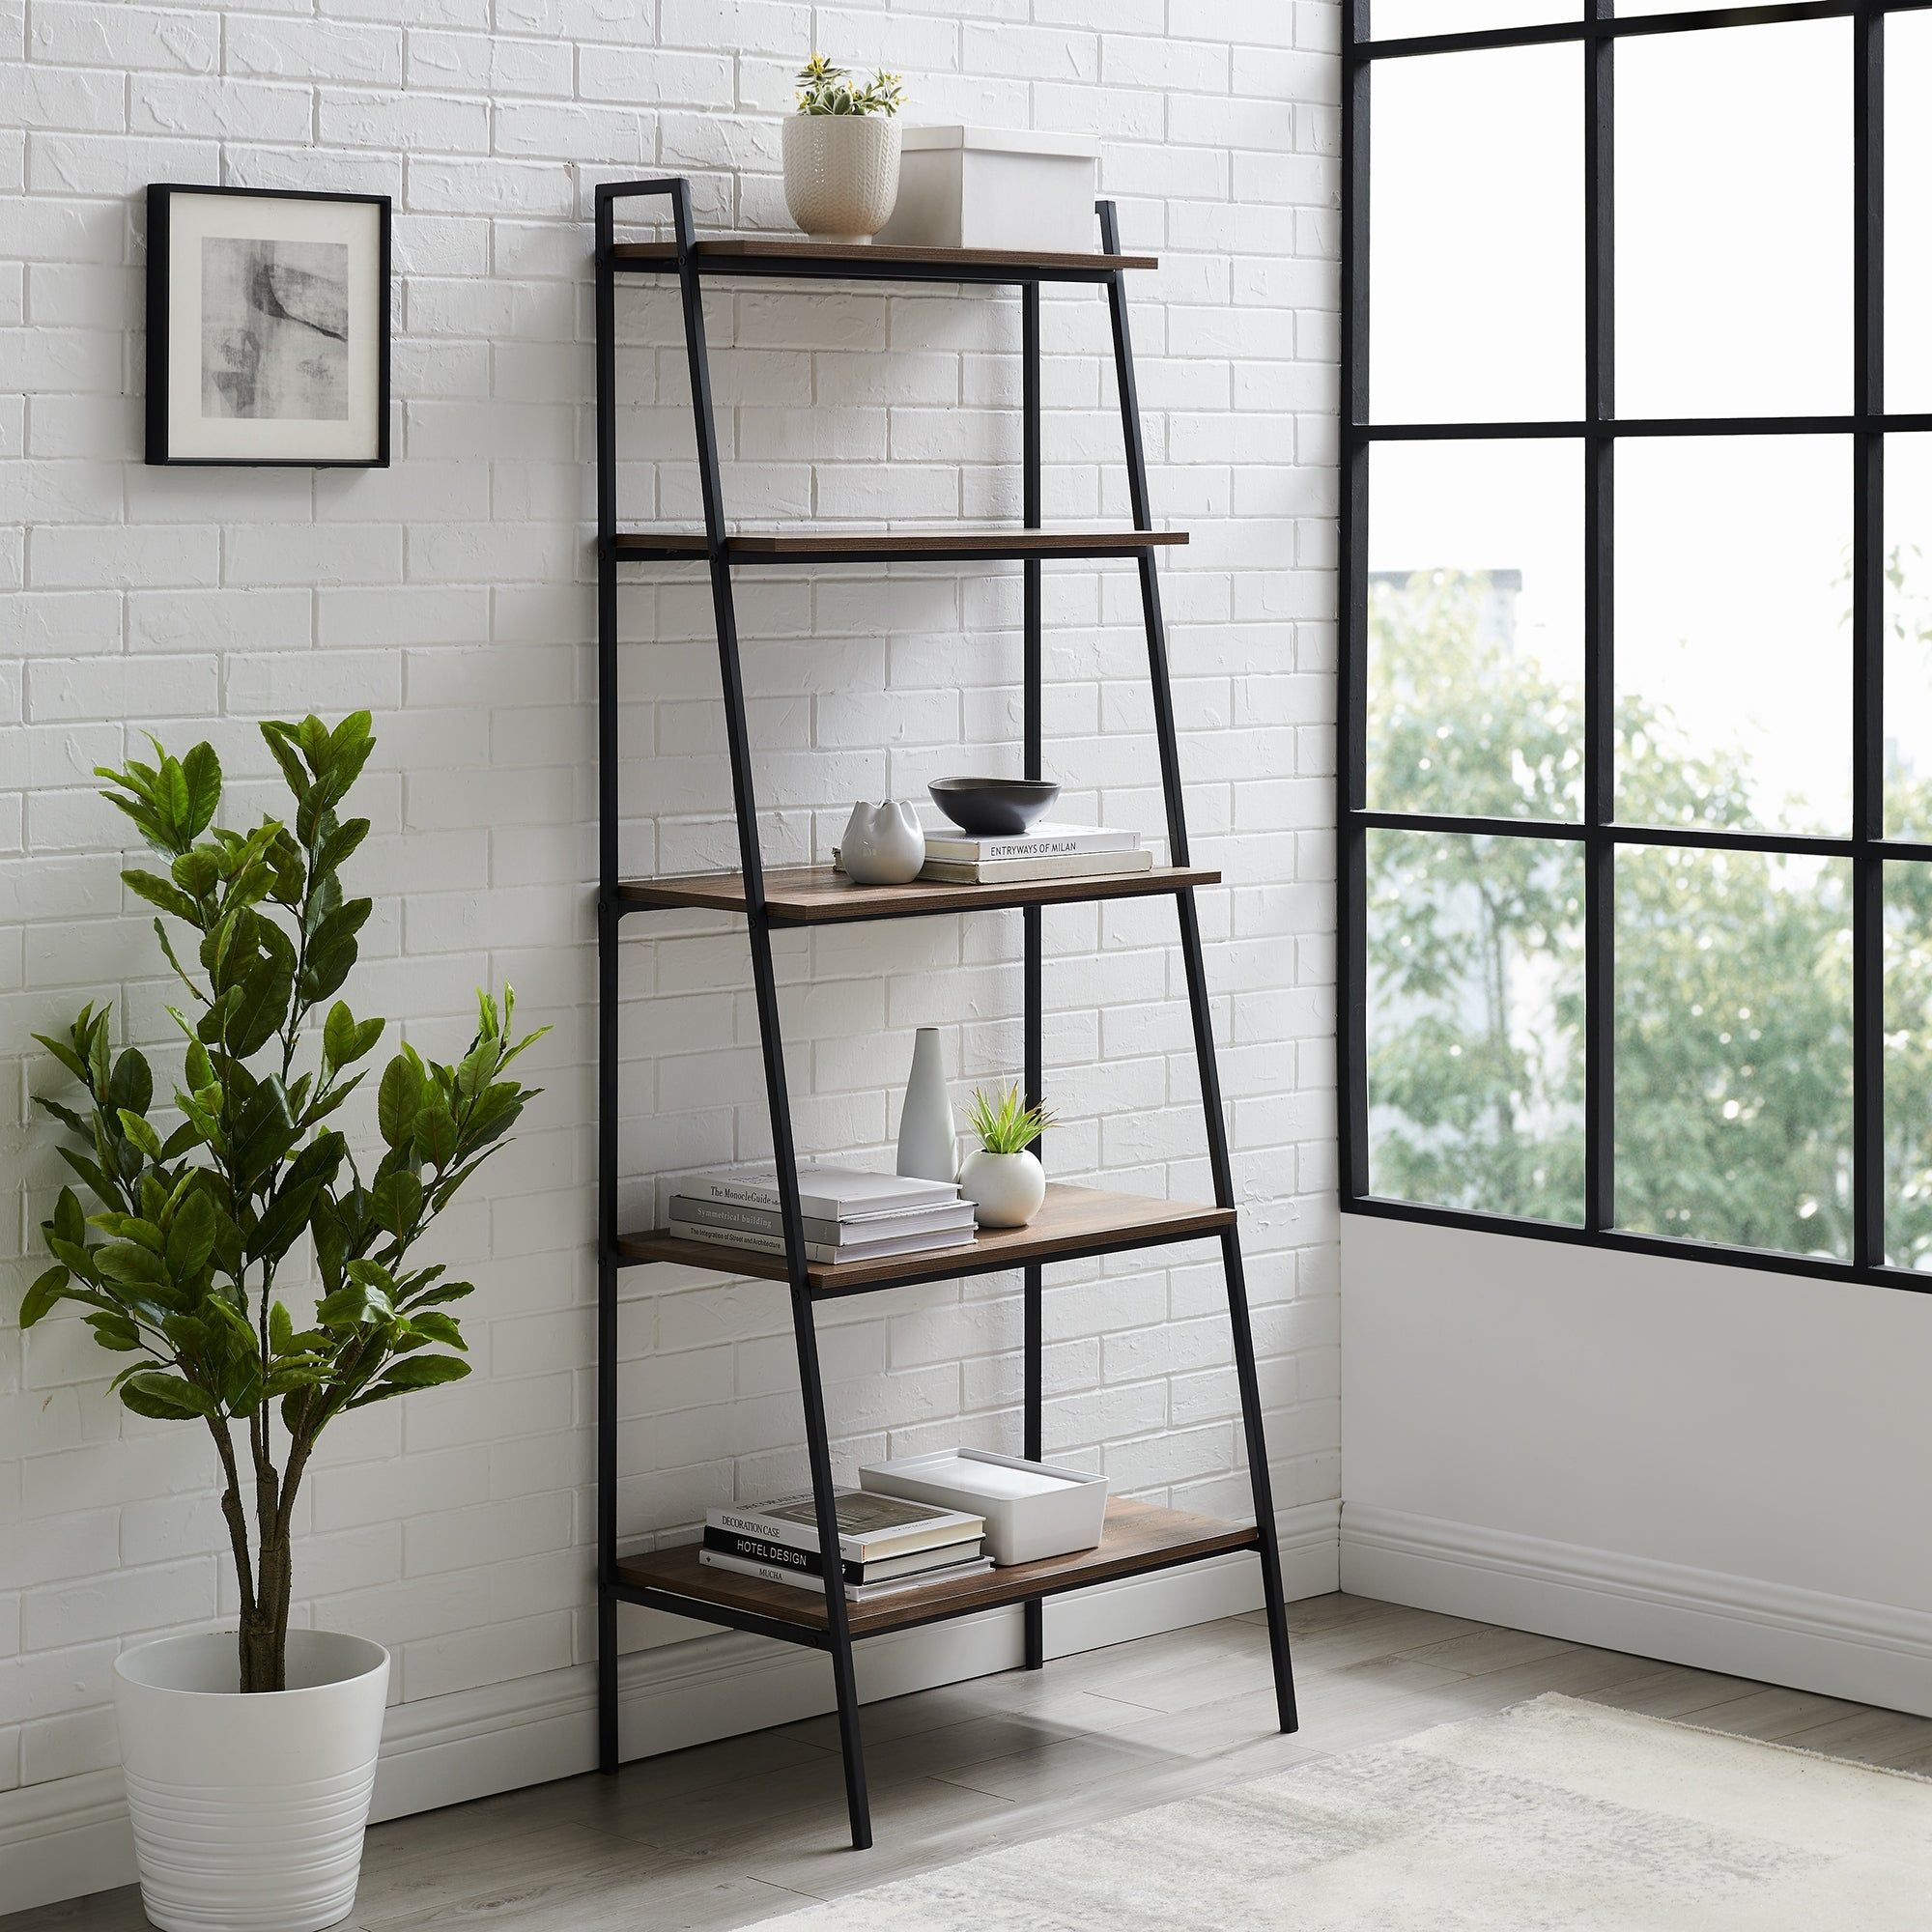 Middlebrook Lahuri 72 Inch Open Ladder 5 Shelf Bookshelf – On Sale –  Overstock – 22105560 With Regard To 72 Inch Bookcases (View 6 of 15)